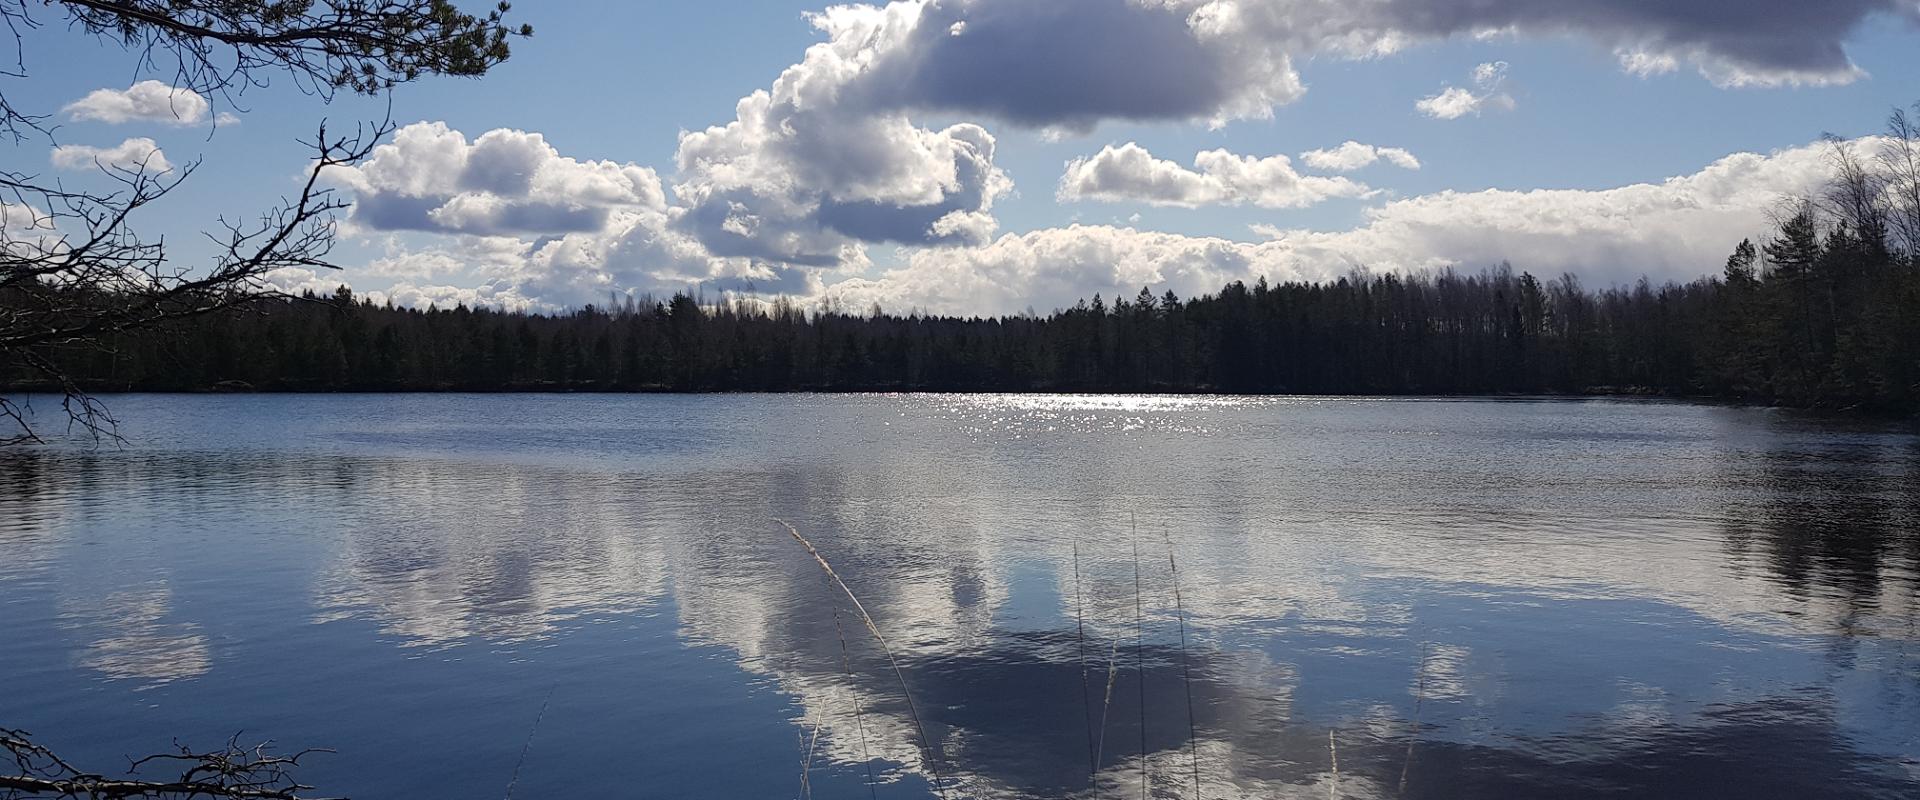 The Kurtna lake district, located in Alutaguse Rural Municipality, is one of Estonias most lake-rich areas, where 42 lakes can be found in an area of 